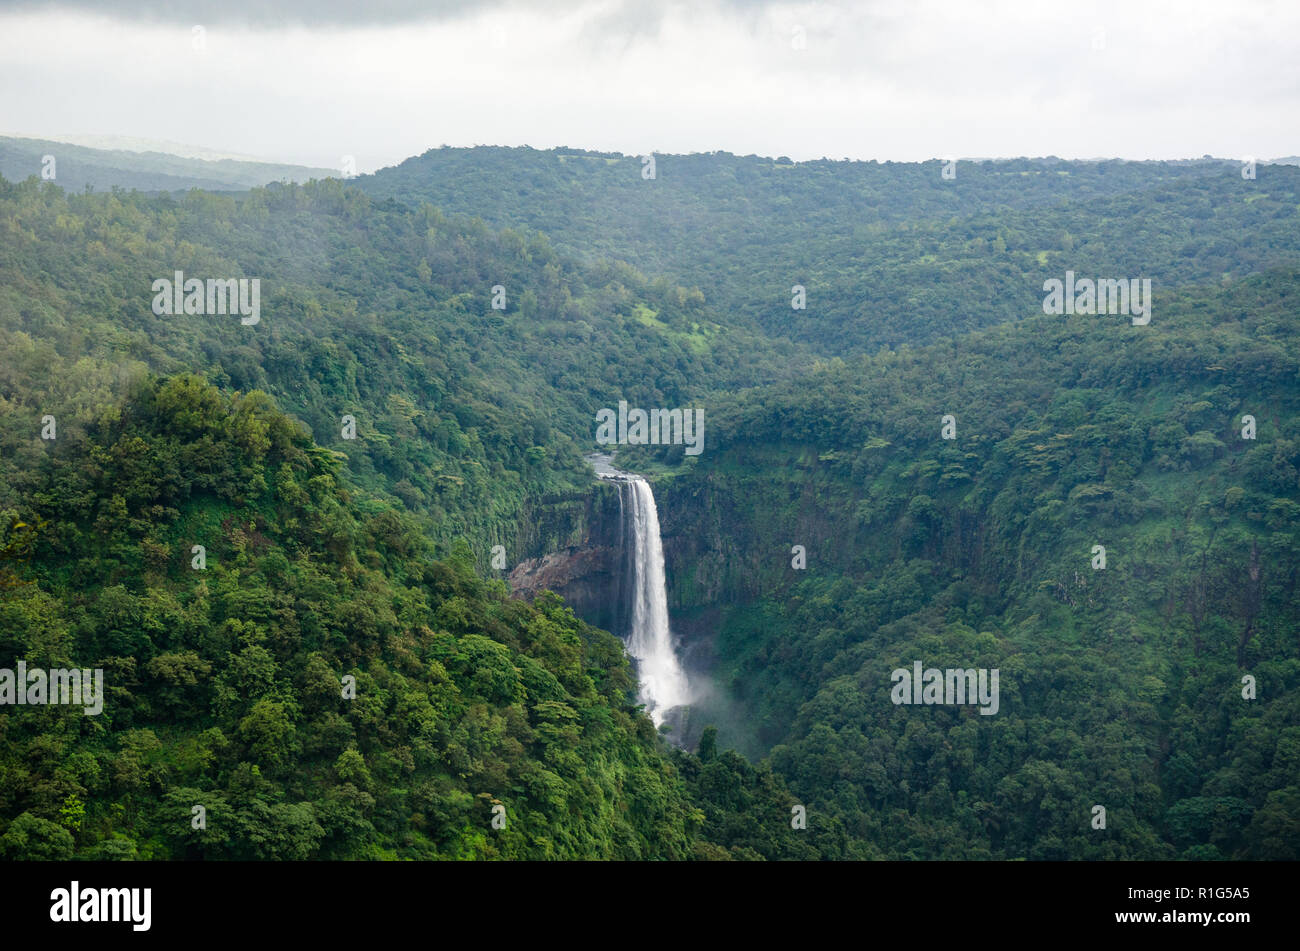 Sural or Surla Falls, known by its Konkani name Ladkyacho Vozar, meaning “Falls of the Beloved”, seen from the viewpoint on Chorla Ghat during Monsoon Stock Photo